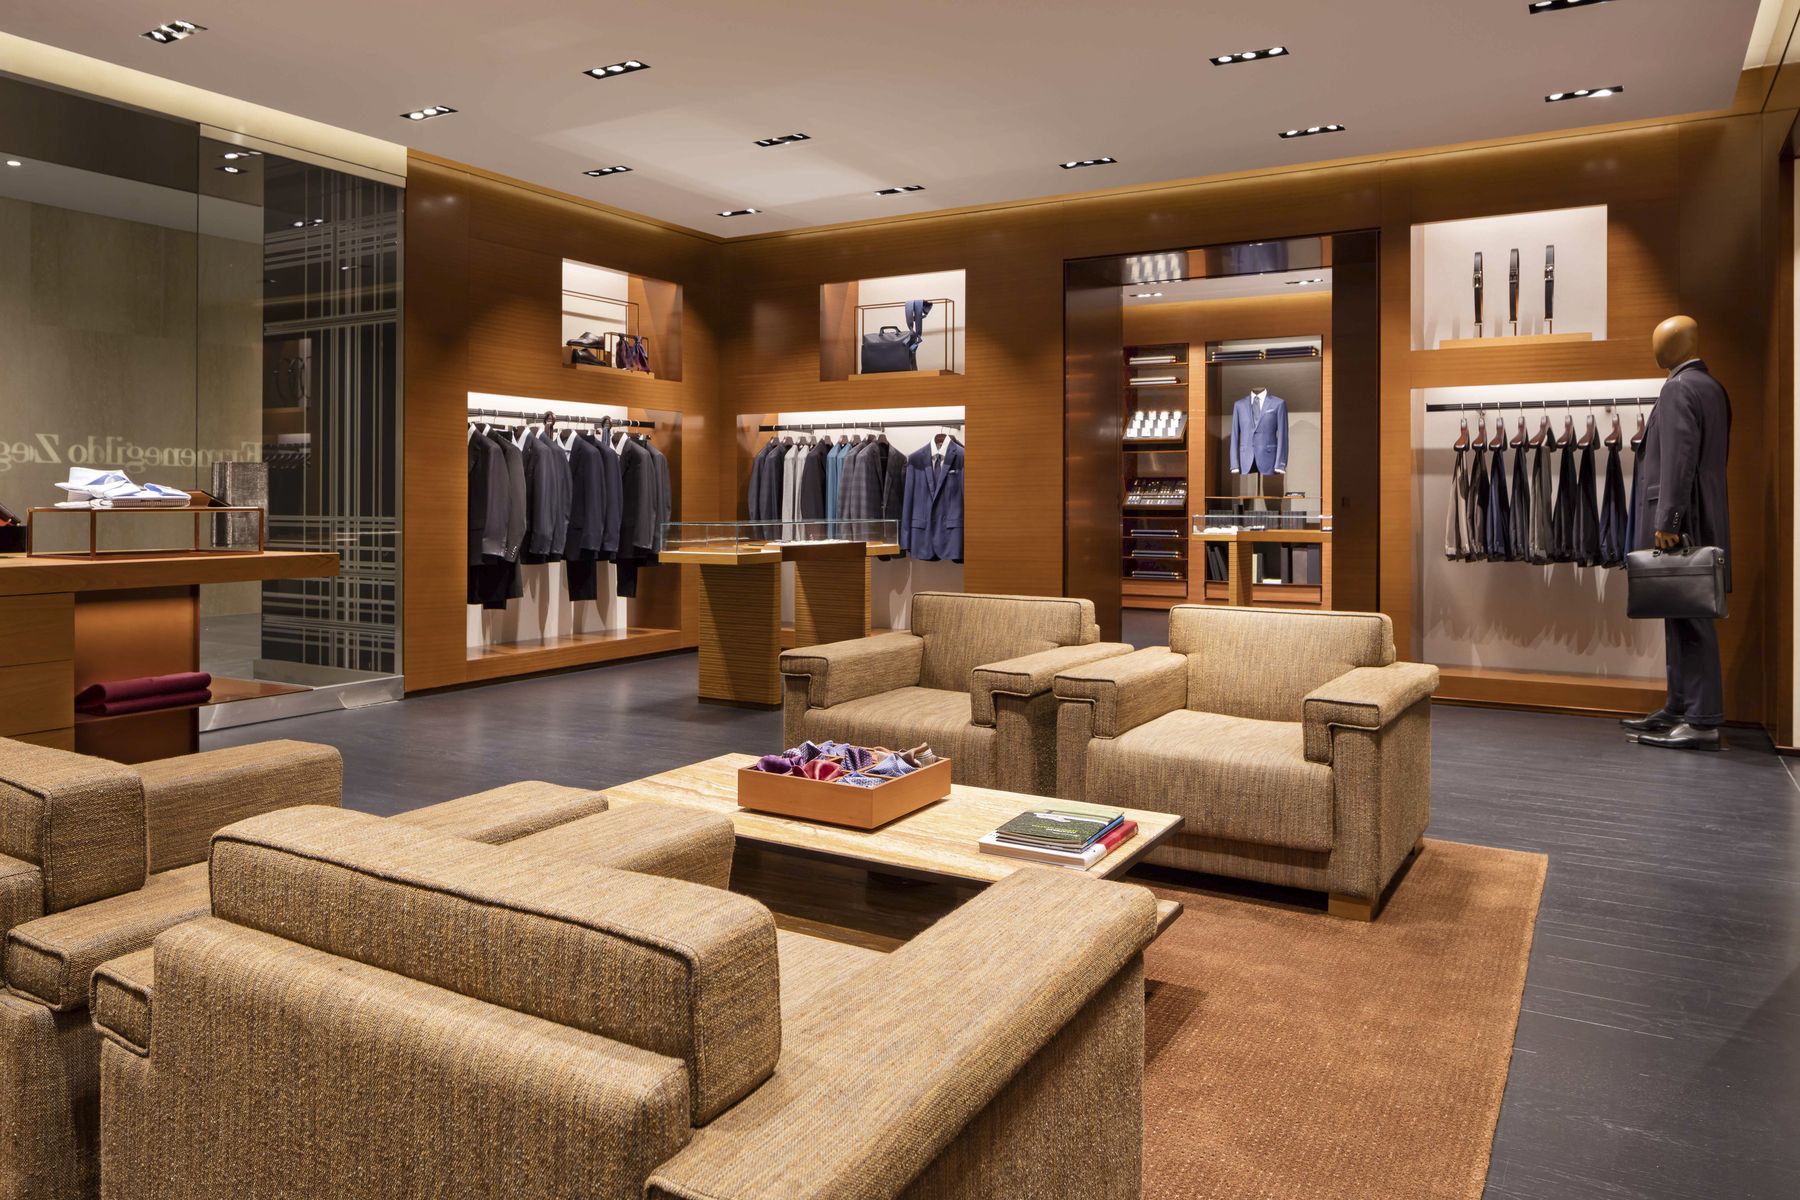 Zegna's Brookfield Place store